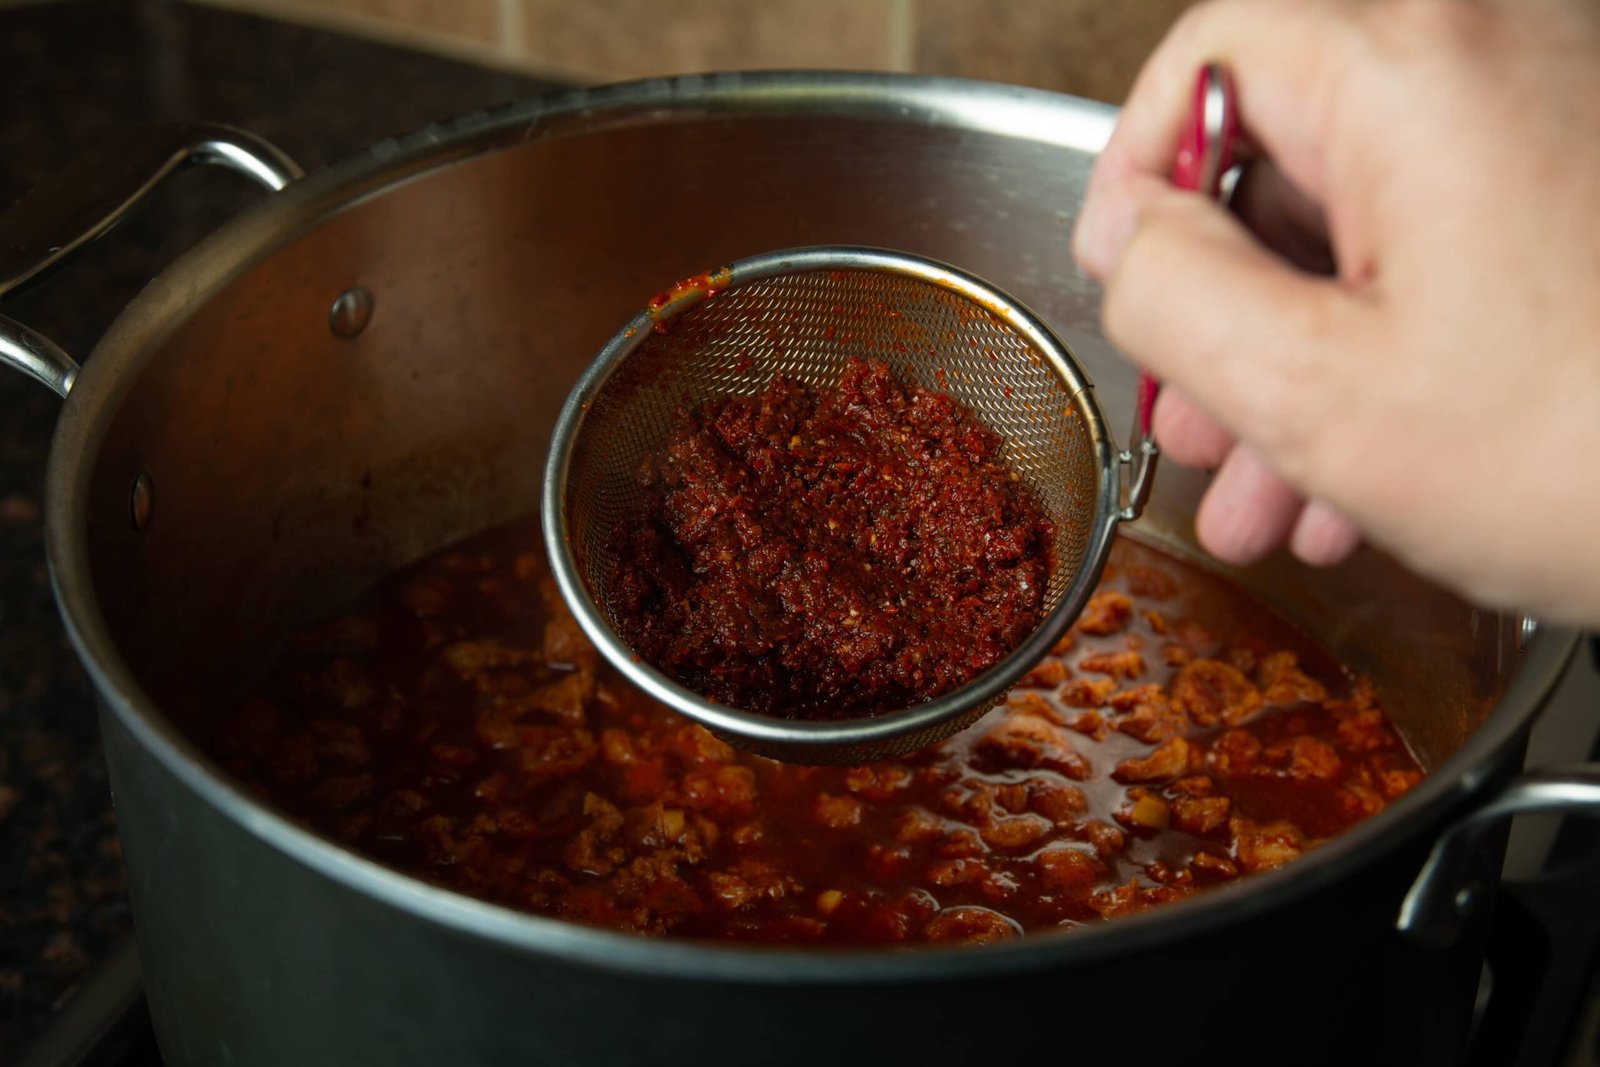 A strainer over the pot of chili with all of the left over bits of chili seeds and skin.